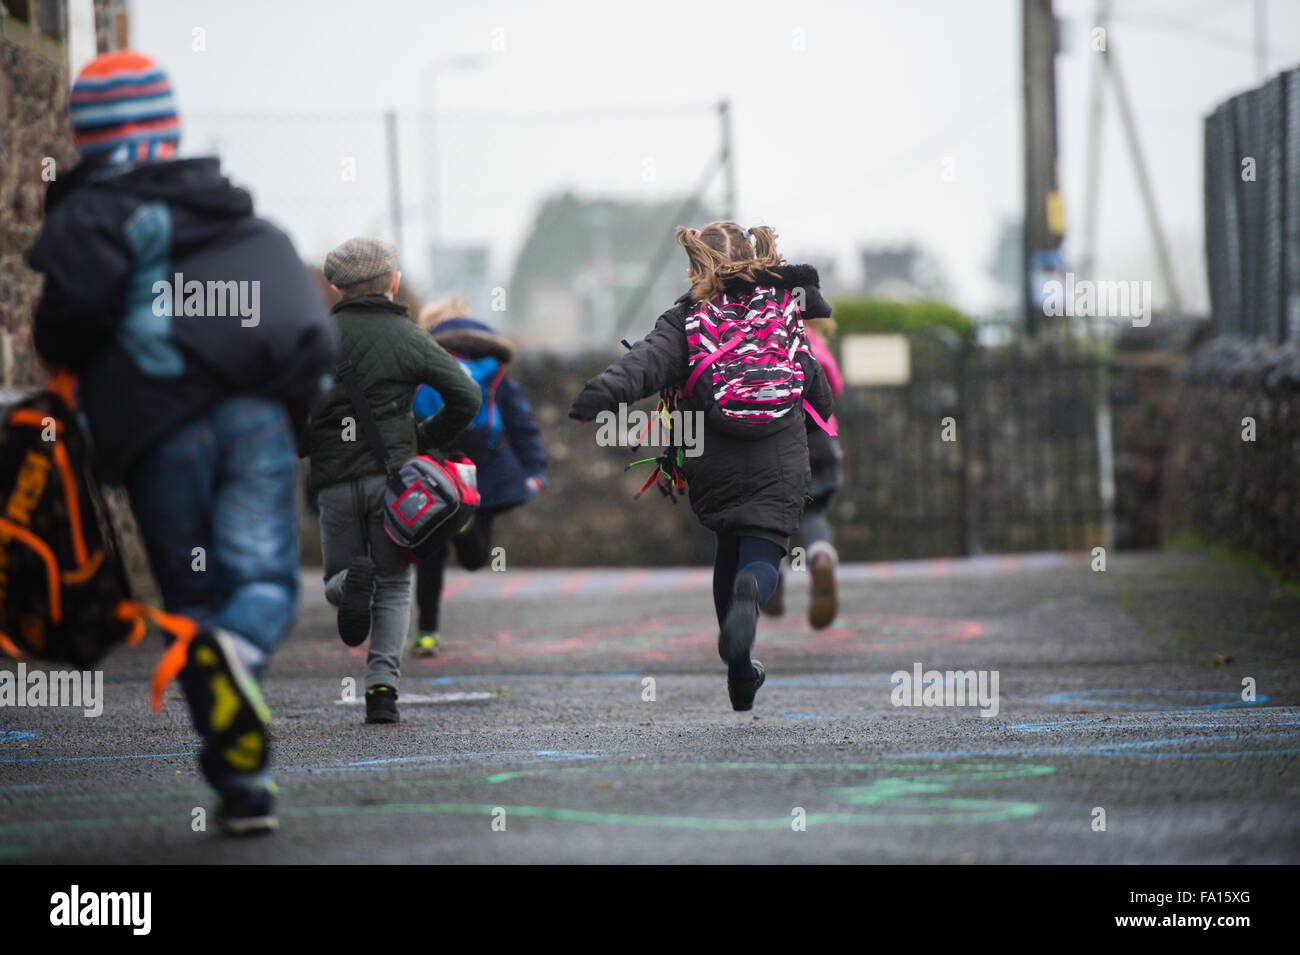 A group of primary school children dashing rushing  running out of their small rural school at the end of the day at the start of the weekend or holidays vacation . Wales UK Stock Photo